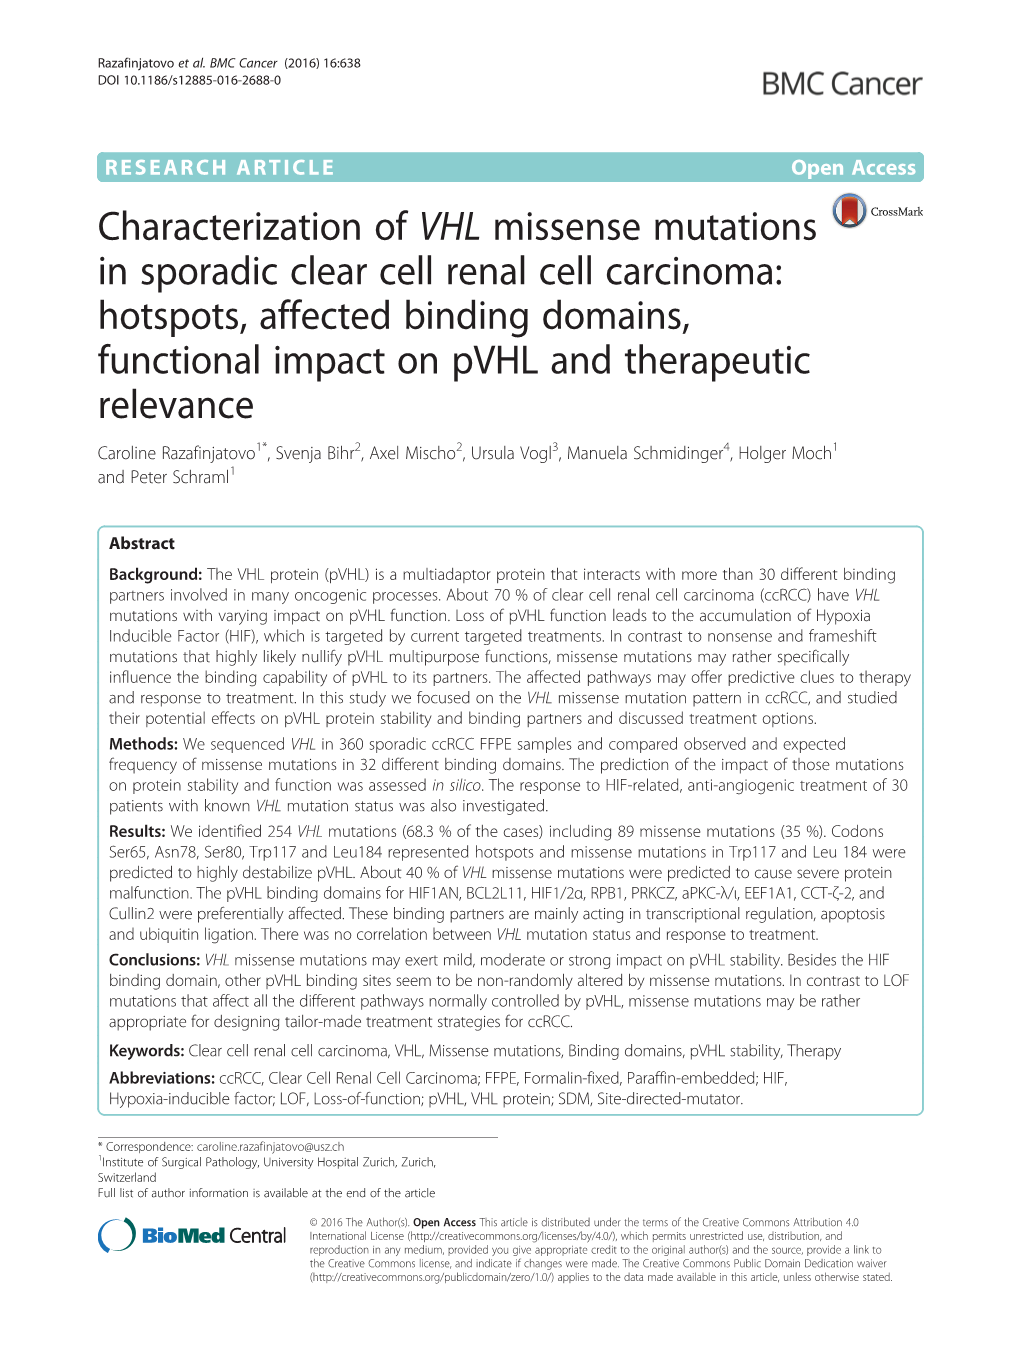 Characterization of VHL Missense Mutations in Sporadic Clear Cell